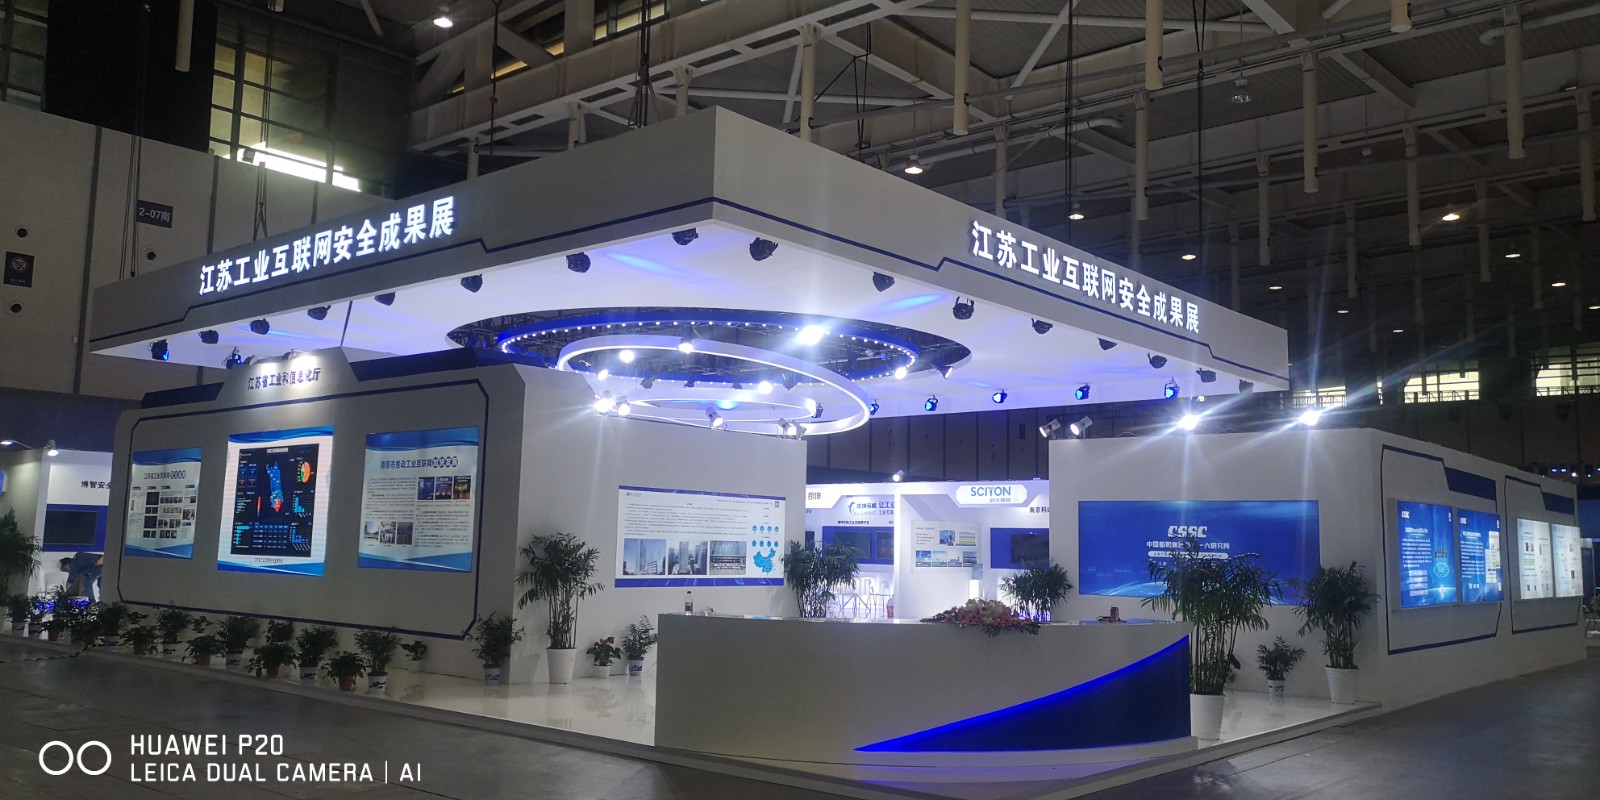 Industrial Internet Security Show 2020 Nanjing